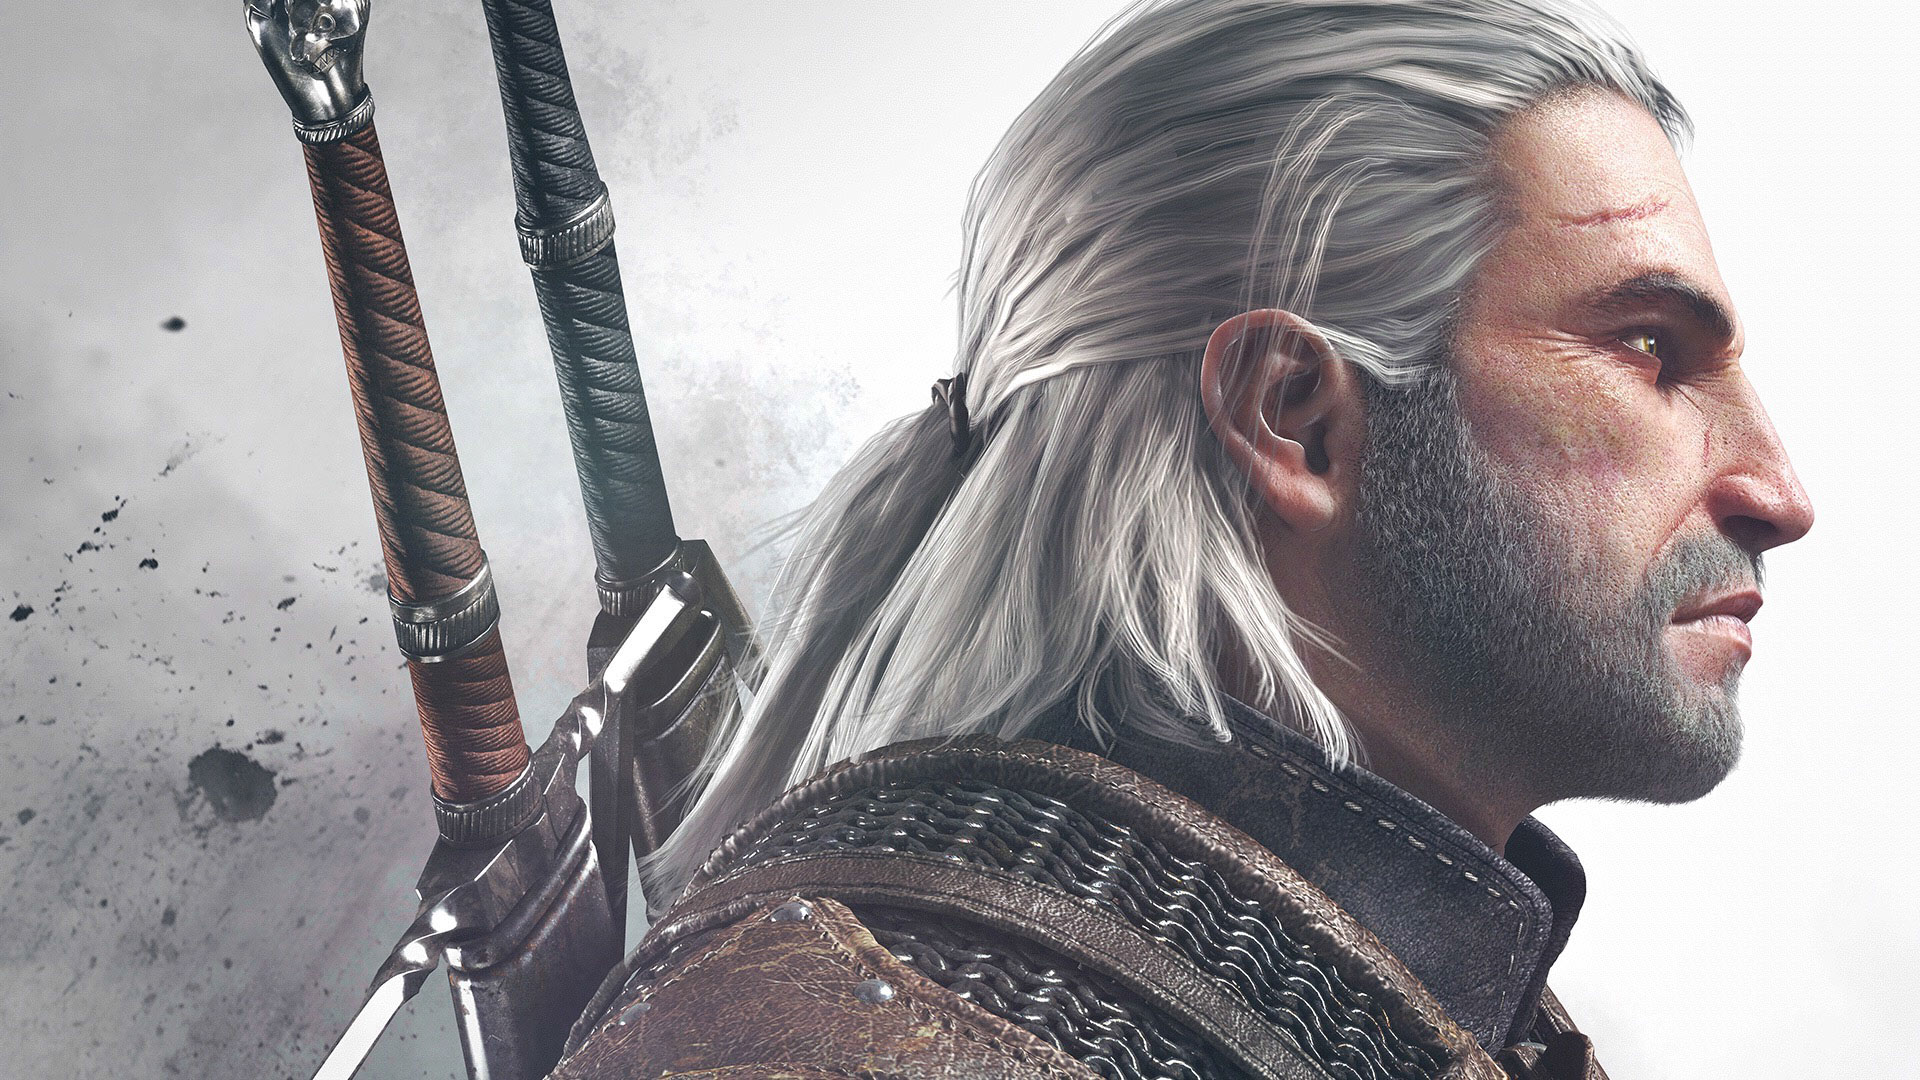 The Witcher 1 Vs The Witcher 2 - Assassins of Kings Vs The Witcher 3 - Wild  Hunt